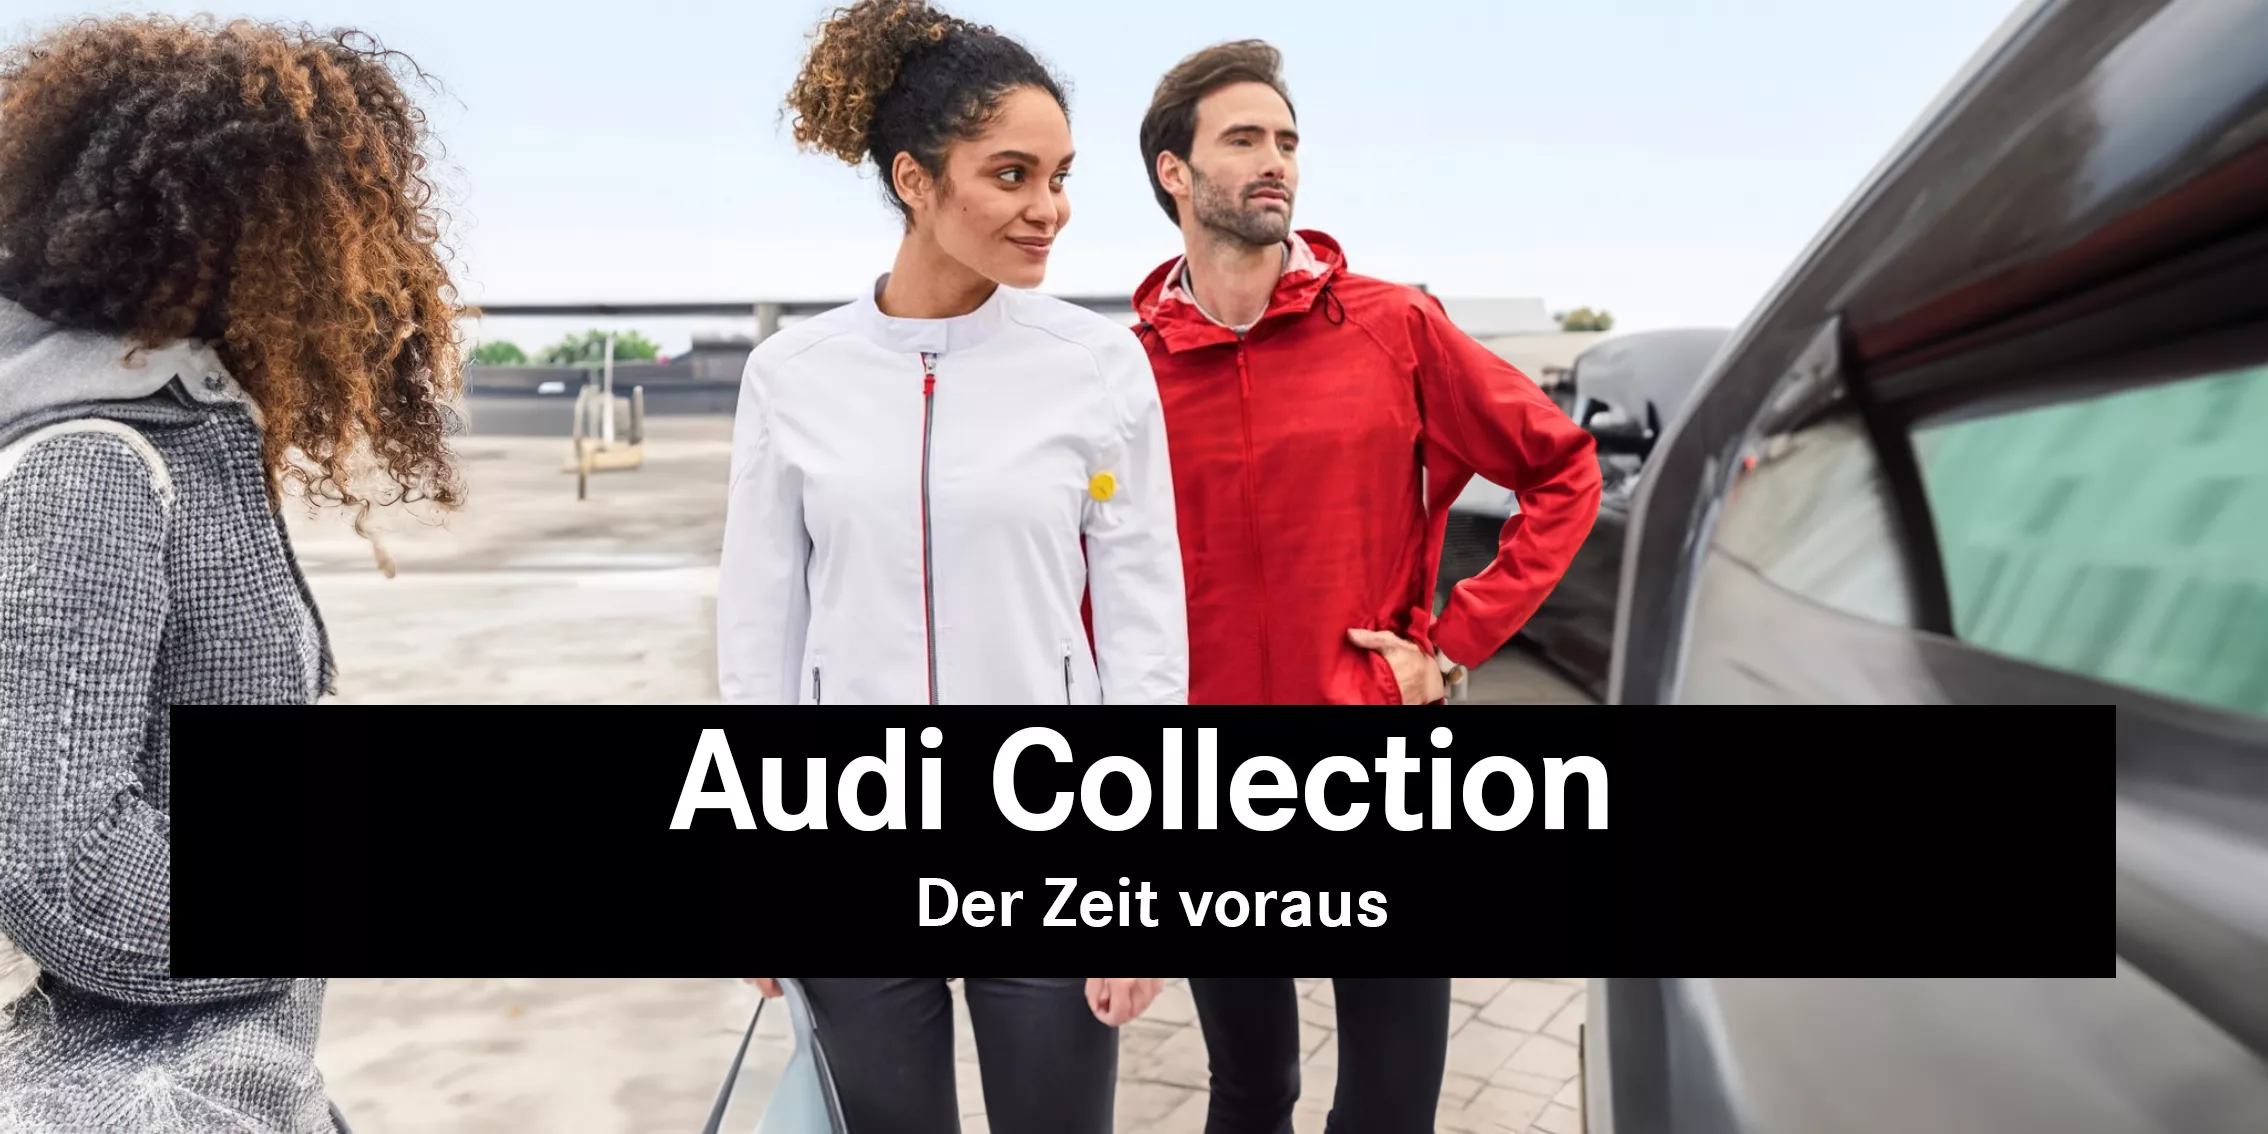 Audi collection teaser